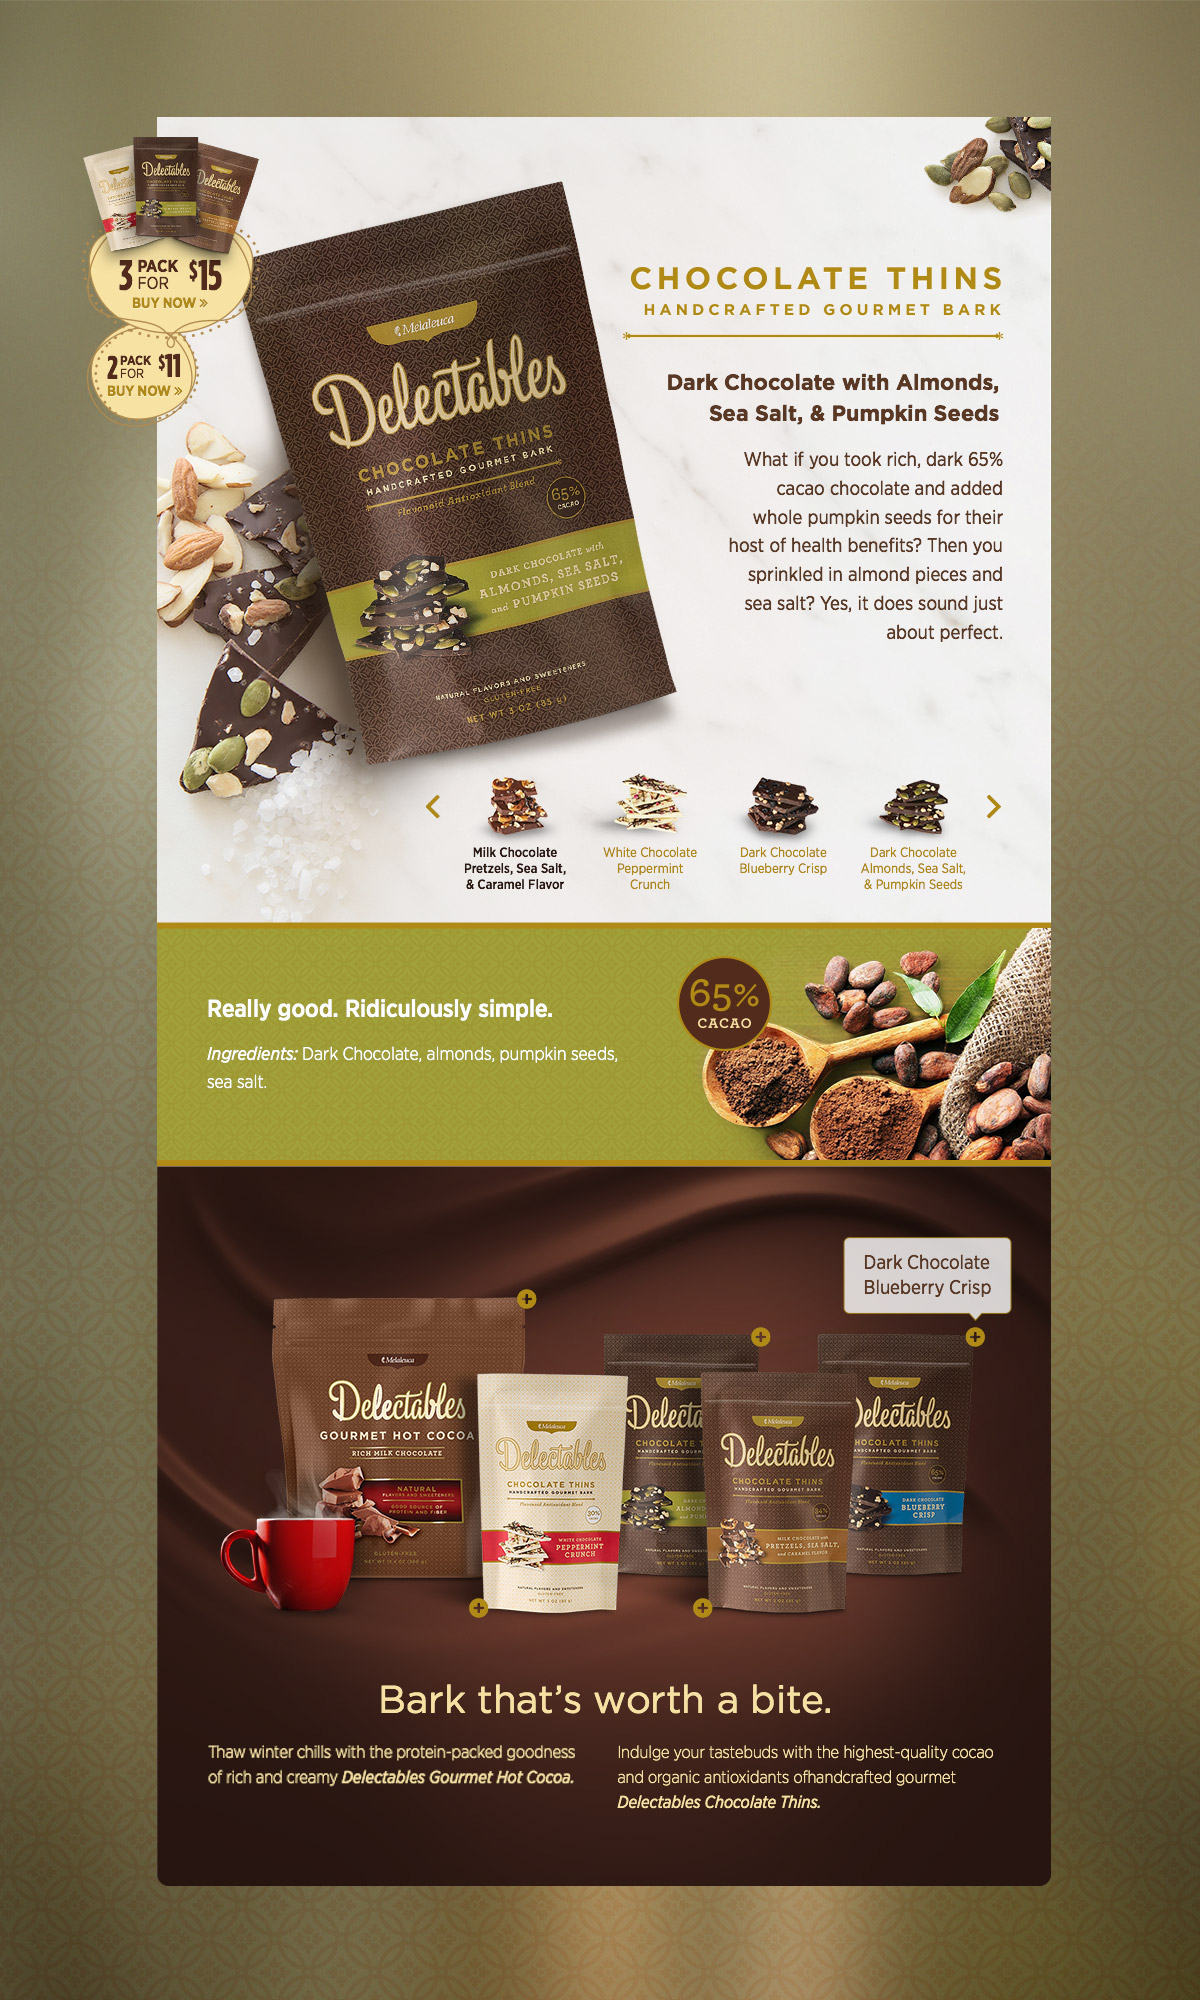 chocolate Deluxe Food  healthy snack nutrition treats gourmet food holiday treats Website landing page